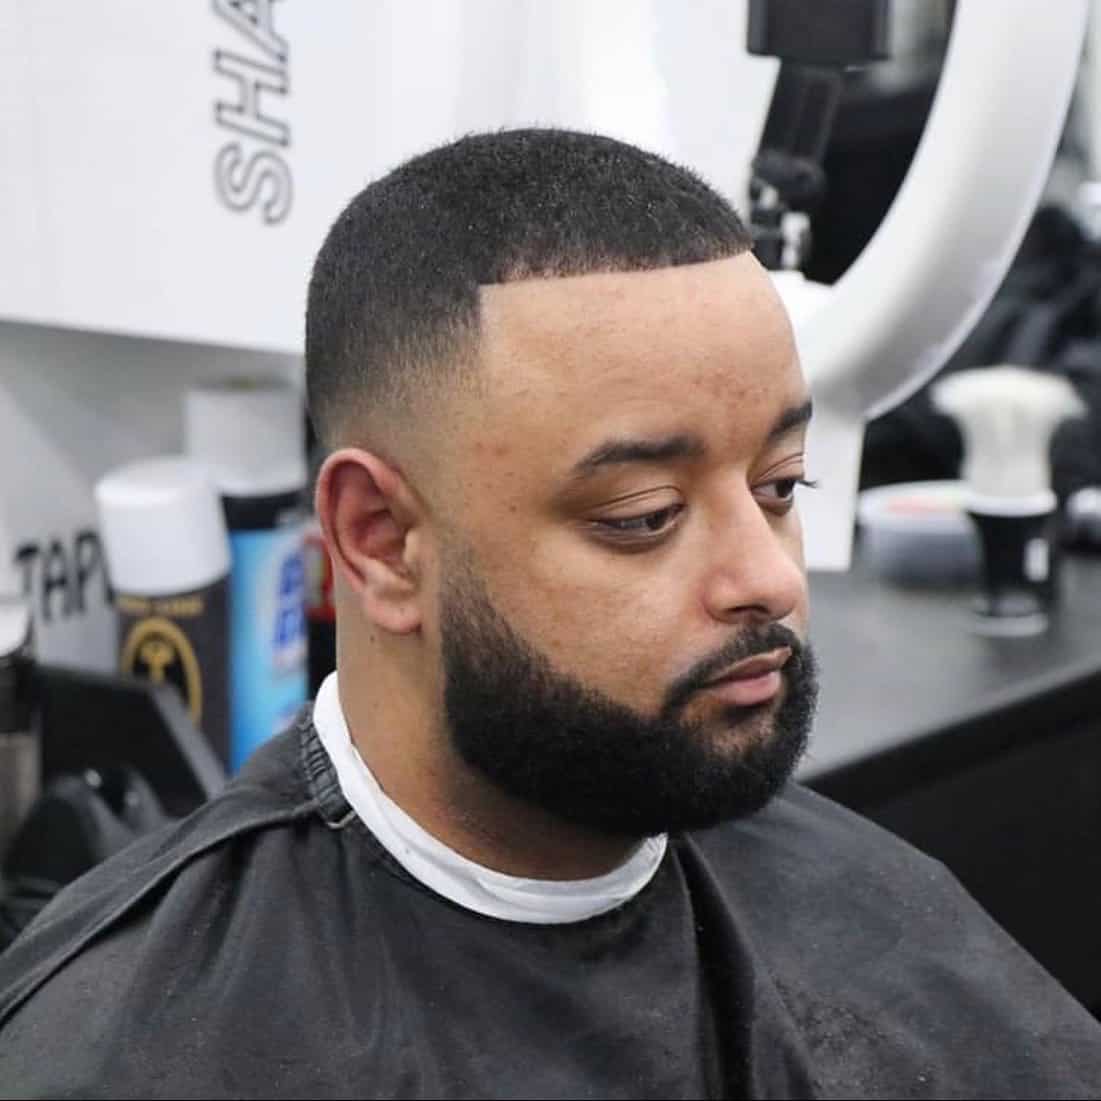 man with a number 3 against the grain with skin fade haircut